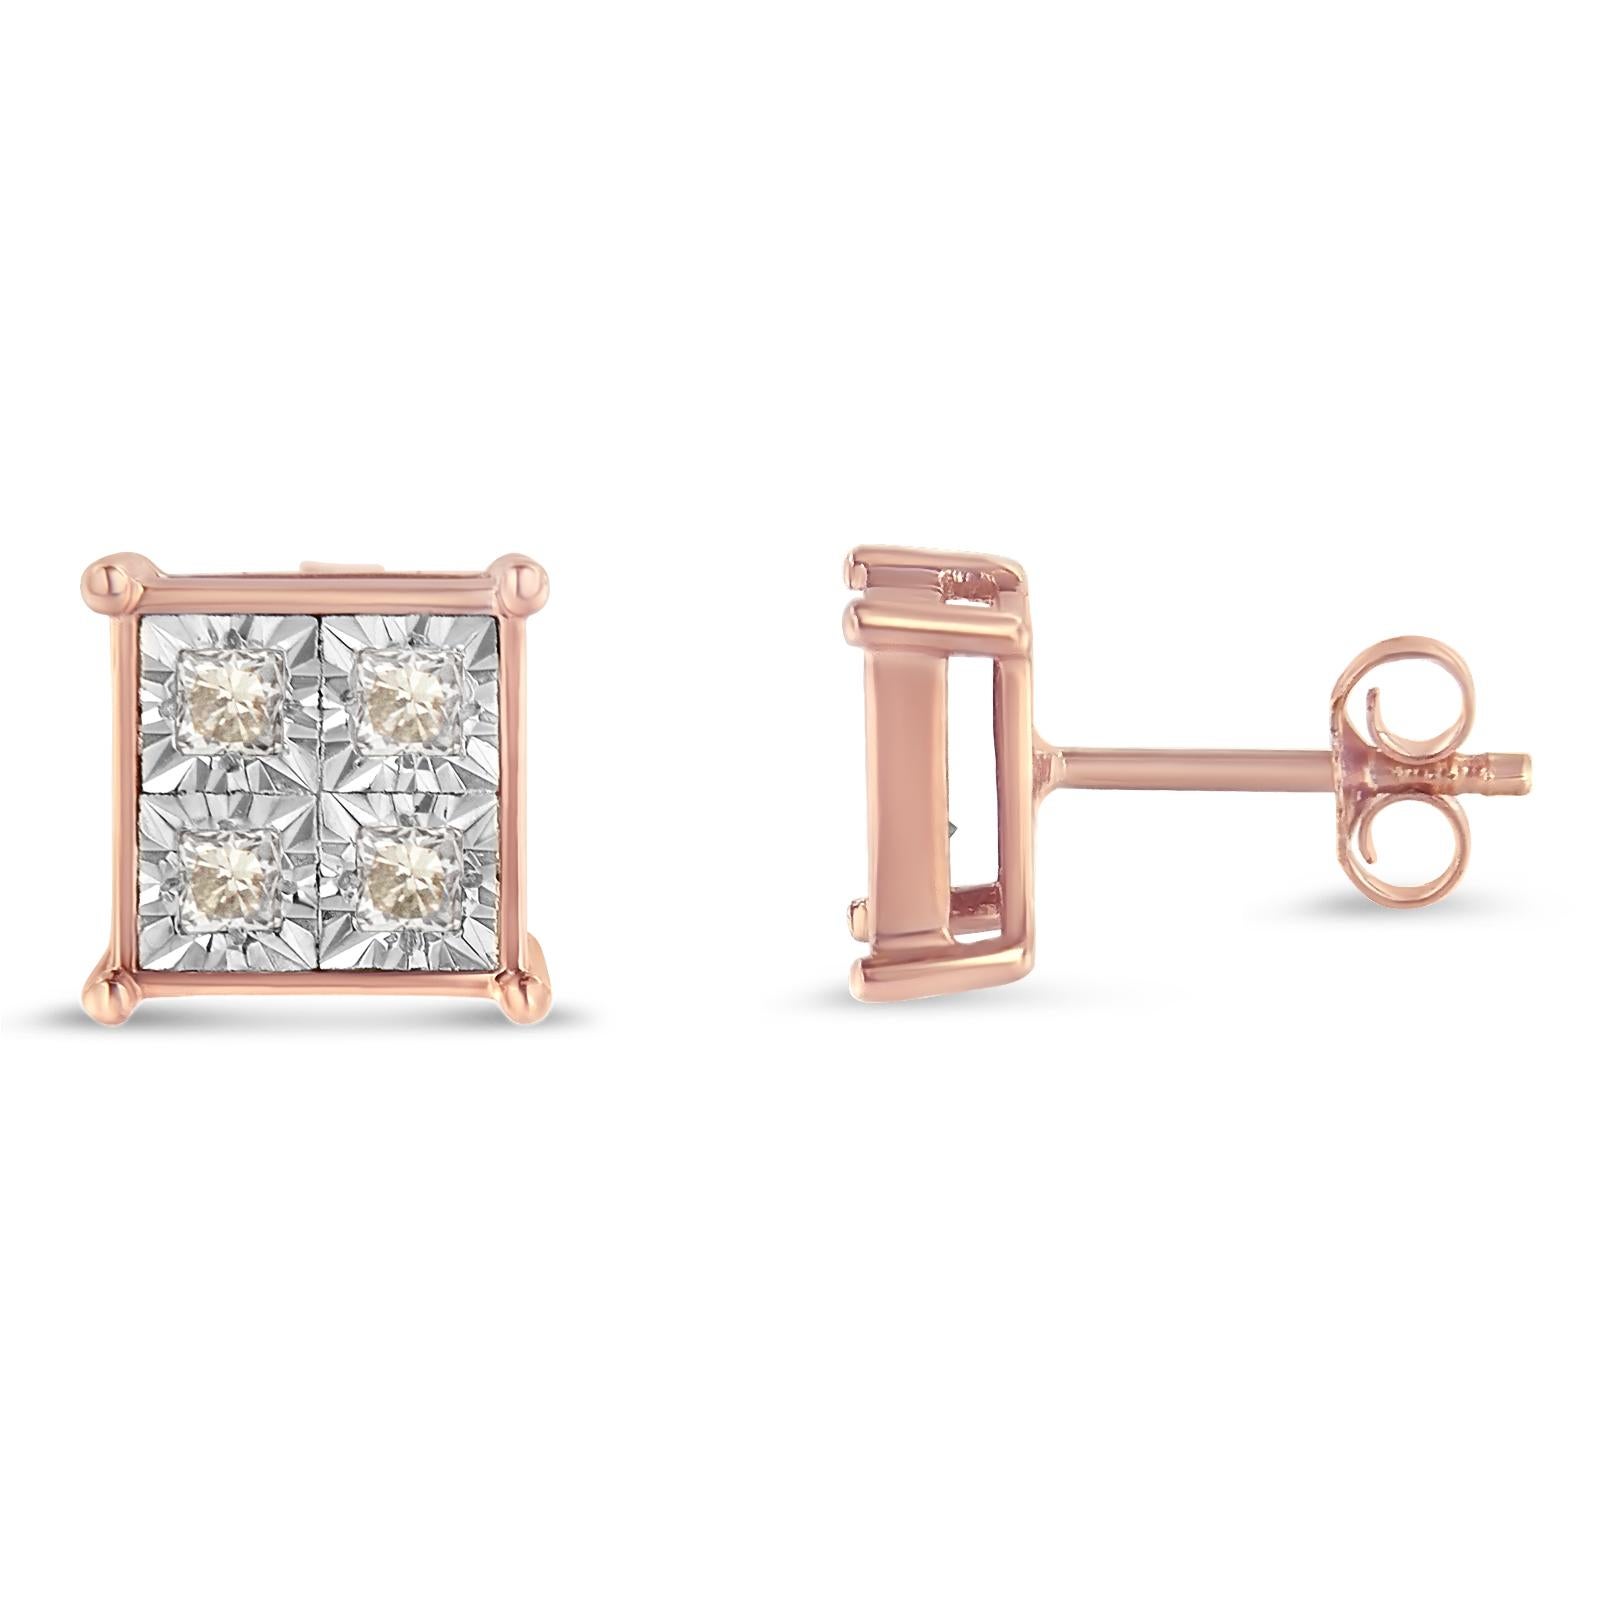 This pair of simple and elegant stud earrings will impress all who see it. It features rose plated sterling silver with eight fragments of princess-cut diamonds arranged in a miracle setting. 'Video Available Upon Request'

Product